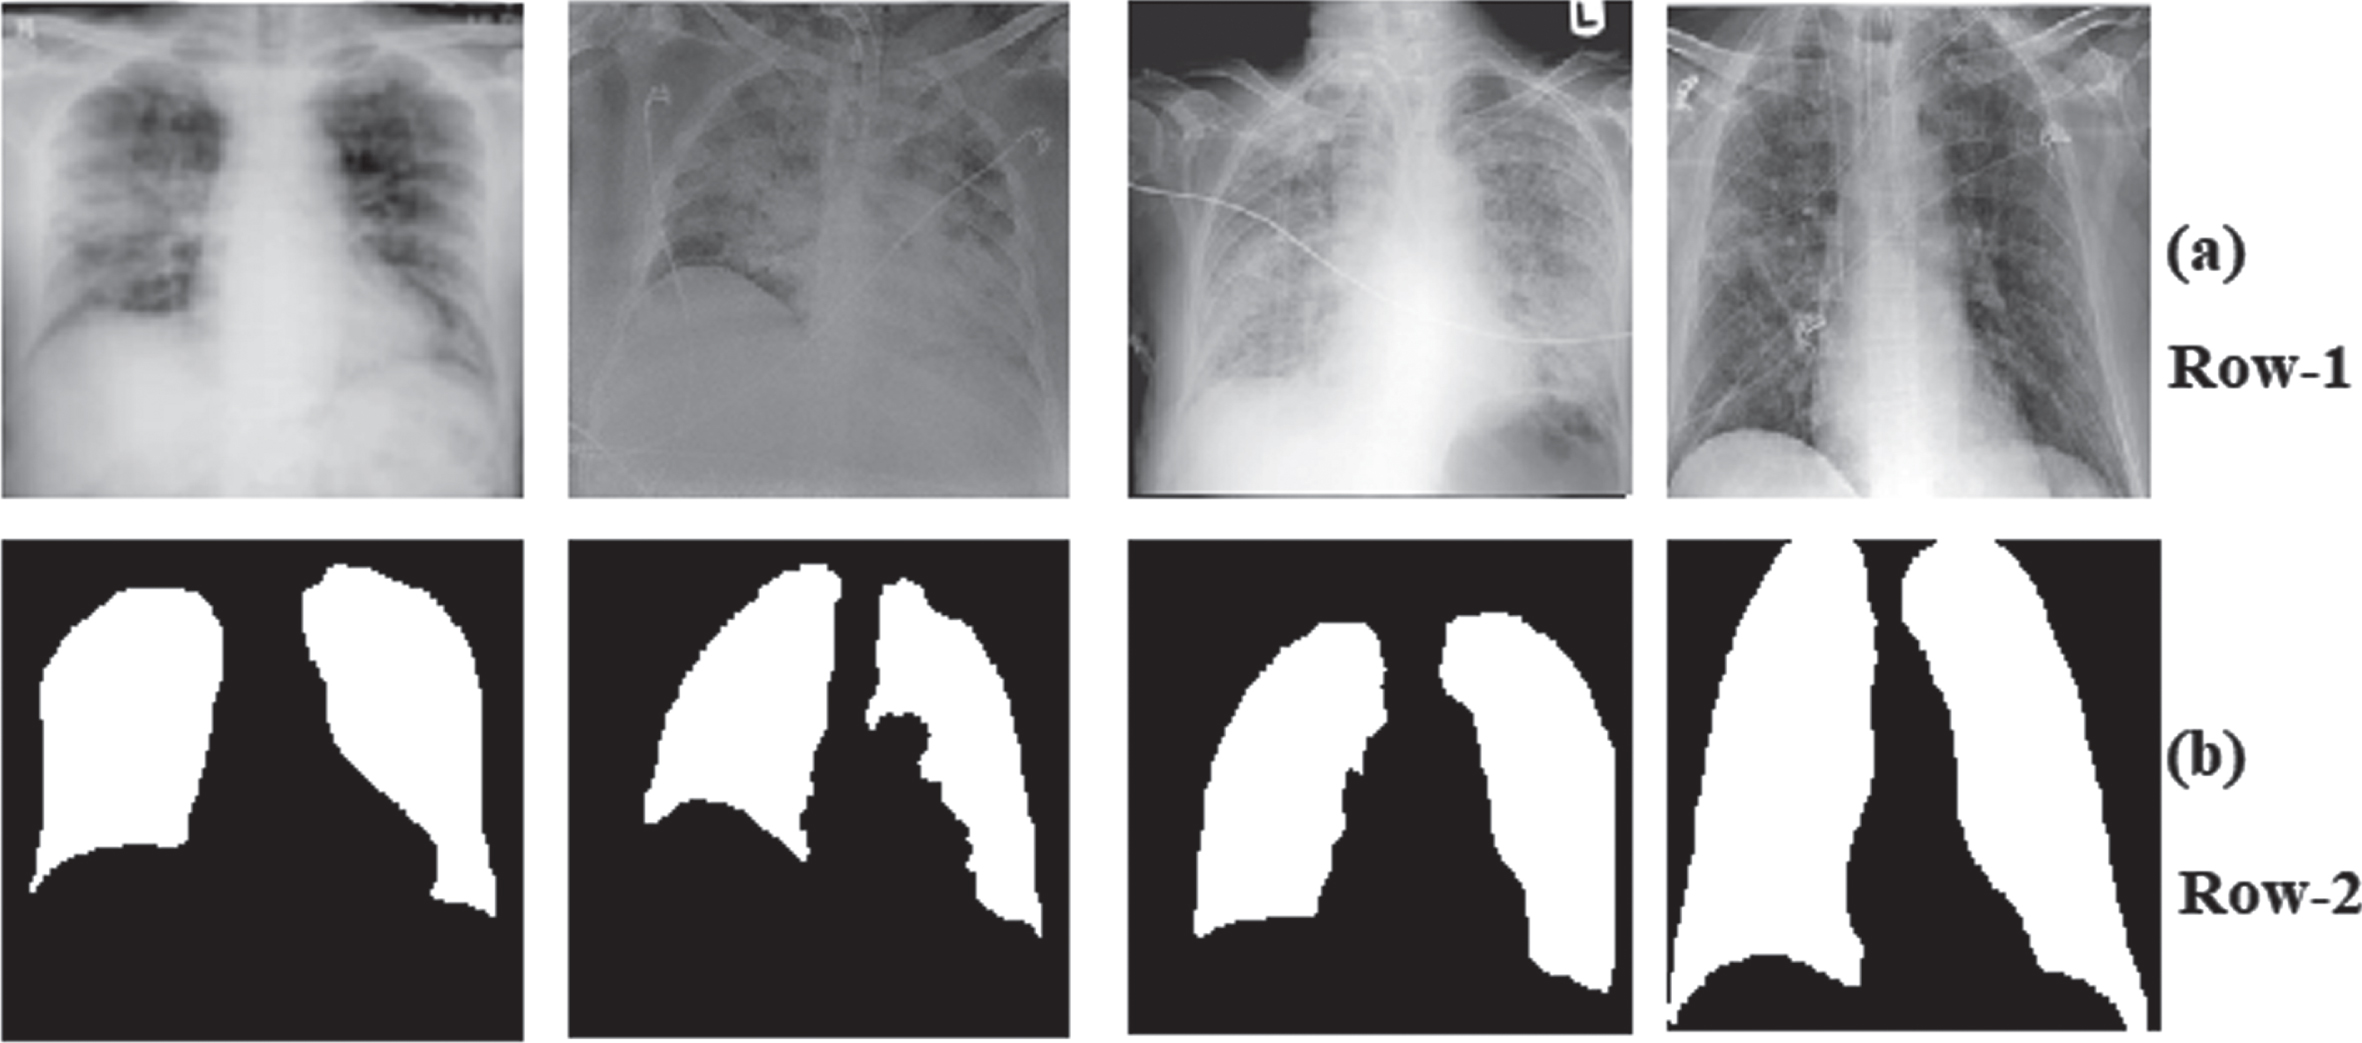 Sample dataset (a) Row-1: COVID-19 CXR images (b) Row-2: Ground-truth images.